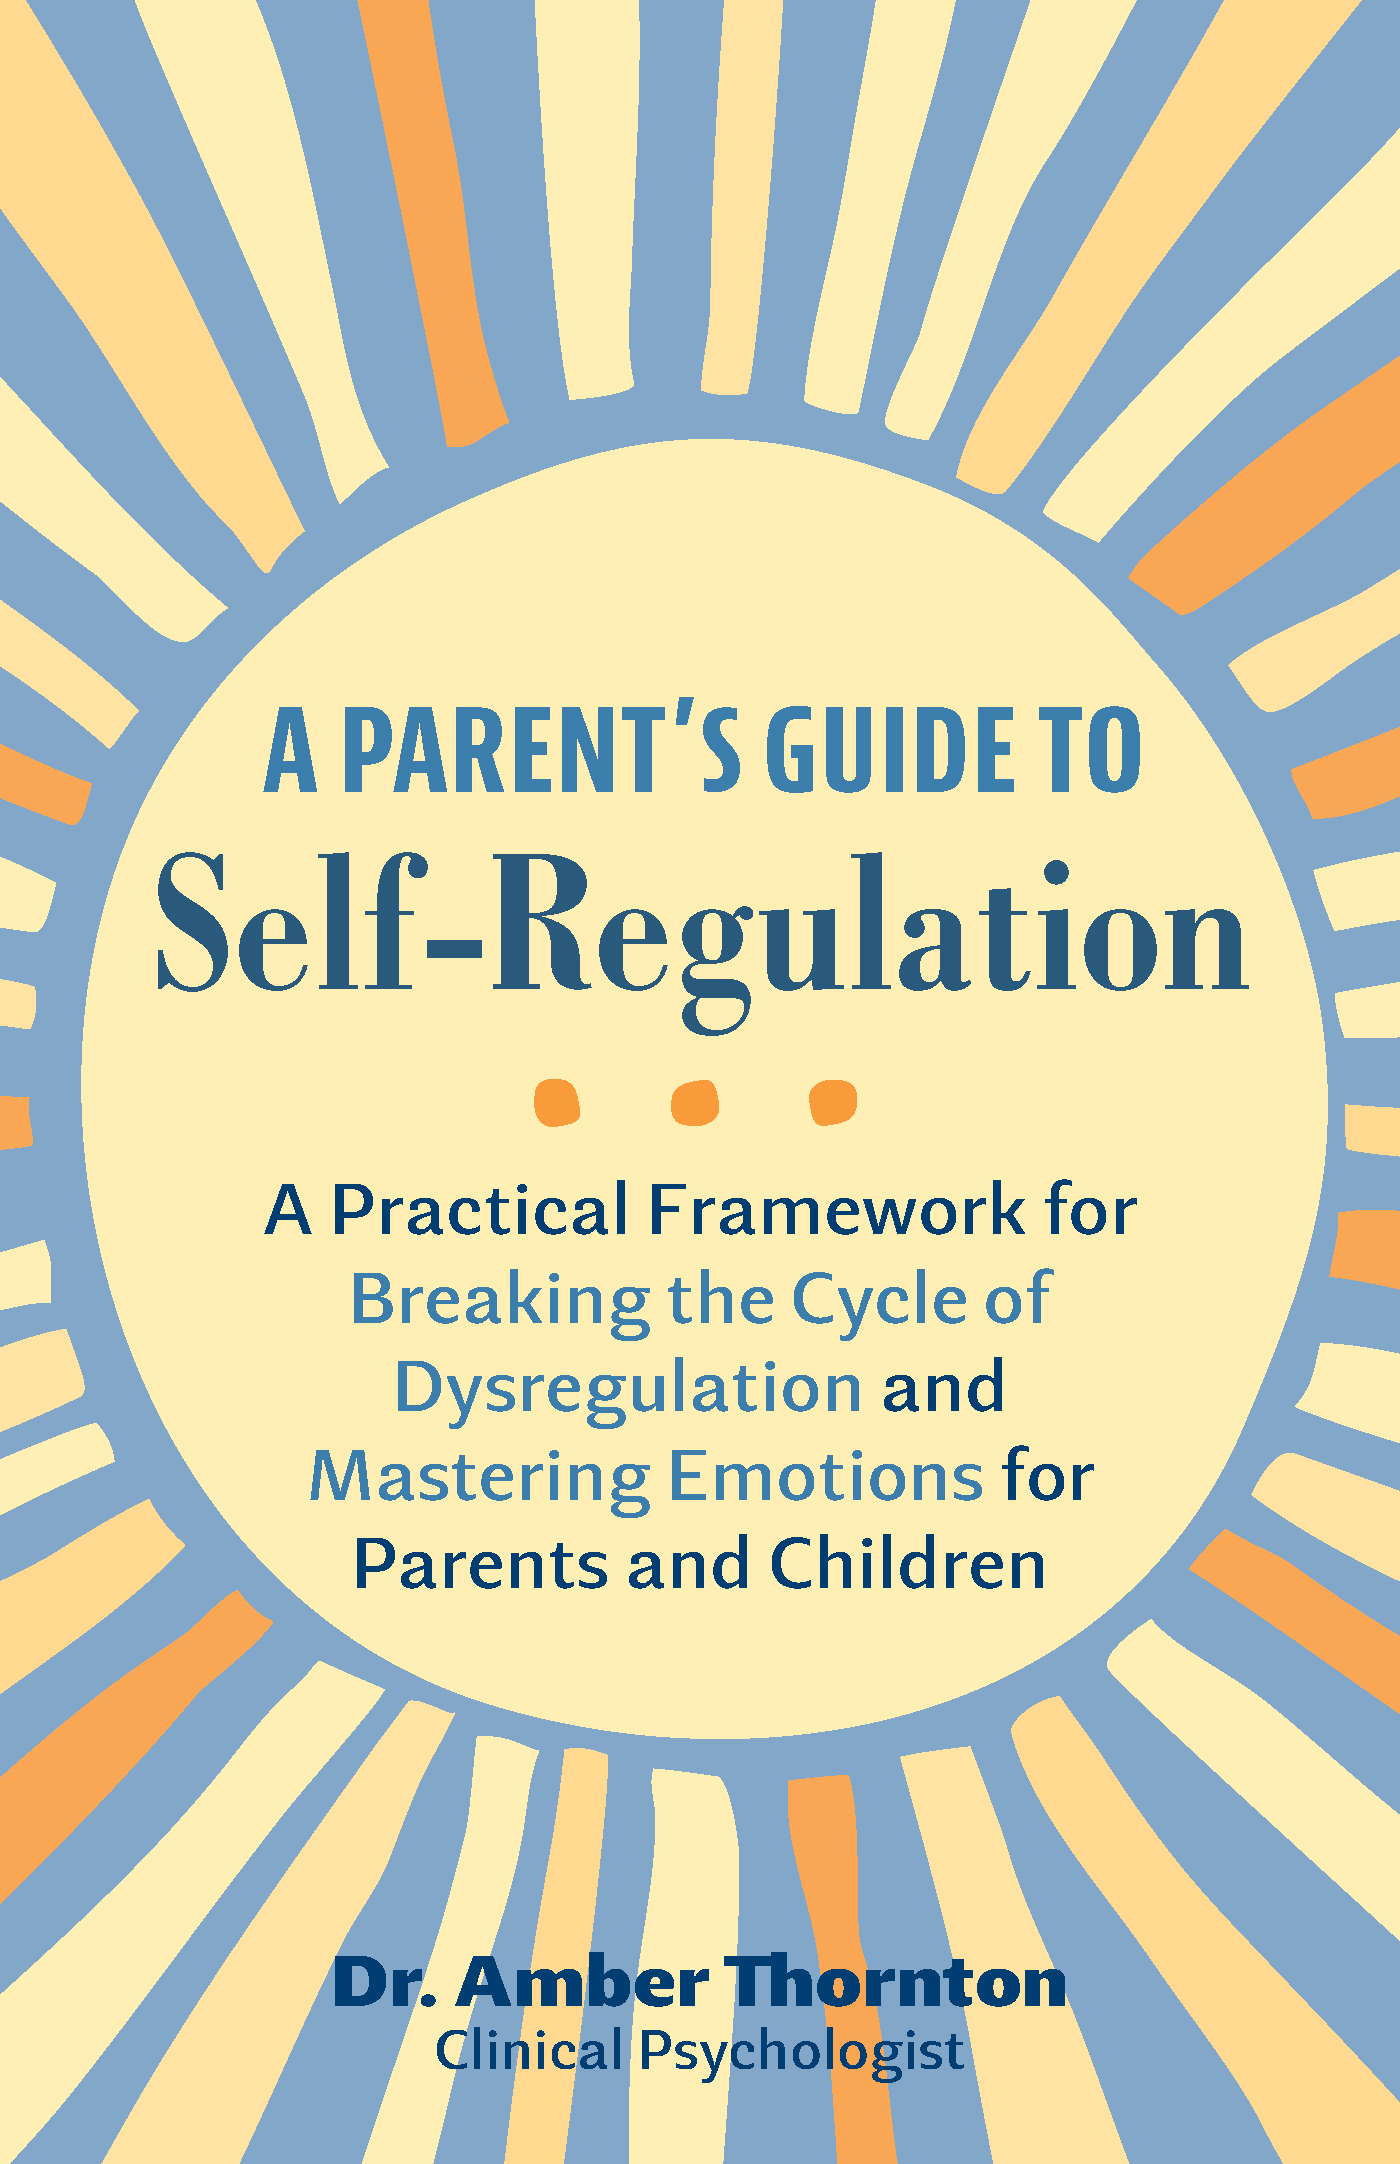 Parents guide to self regulation